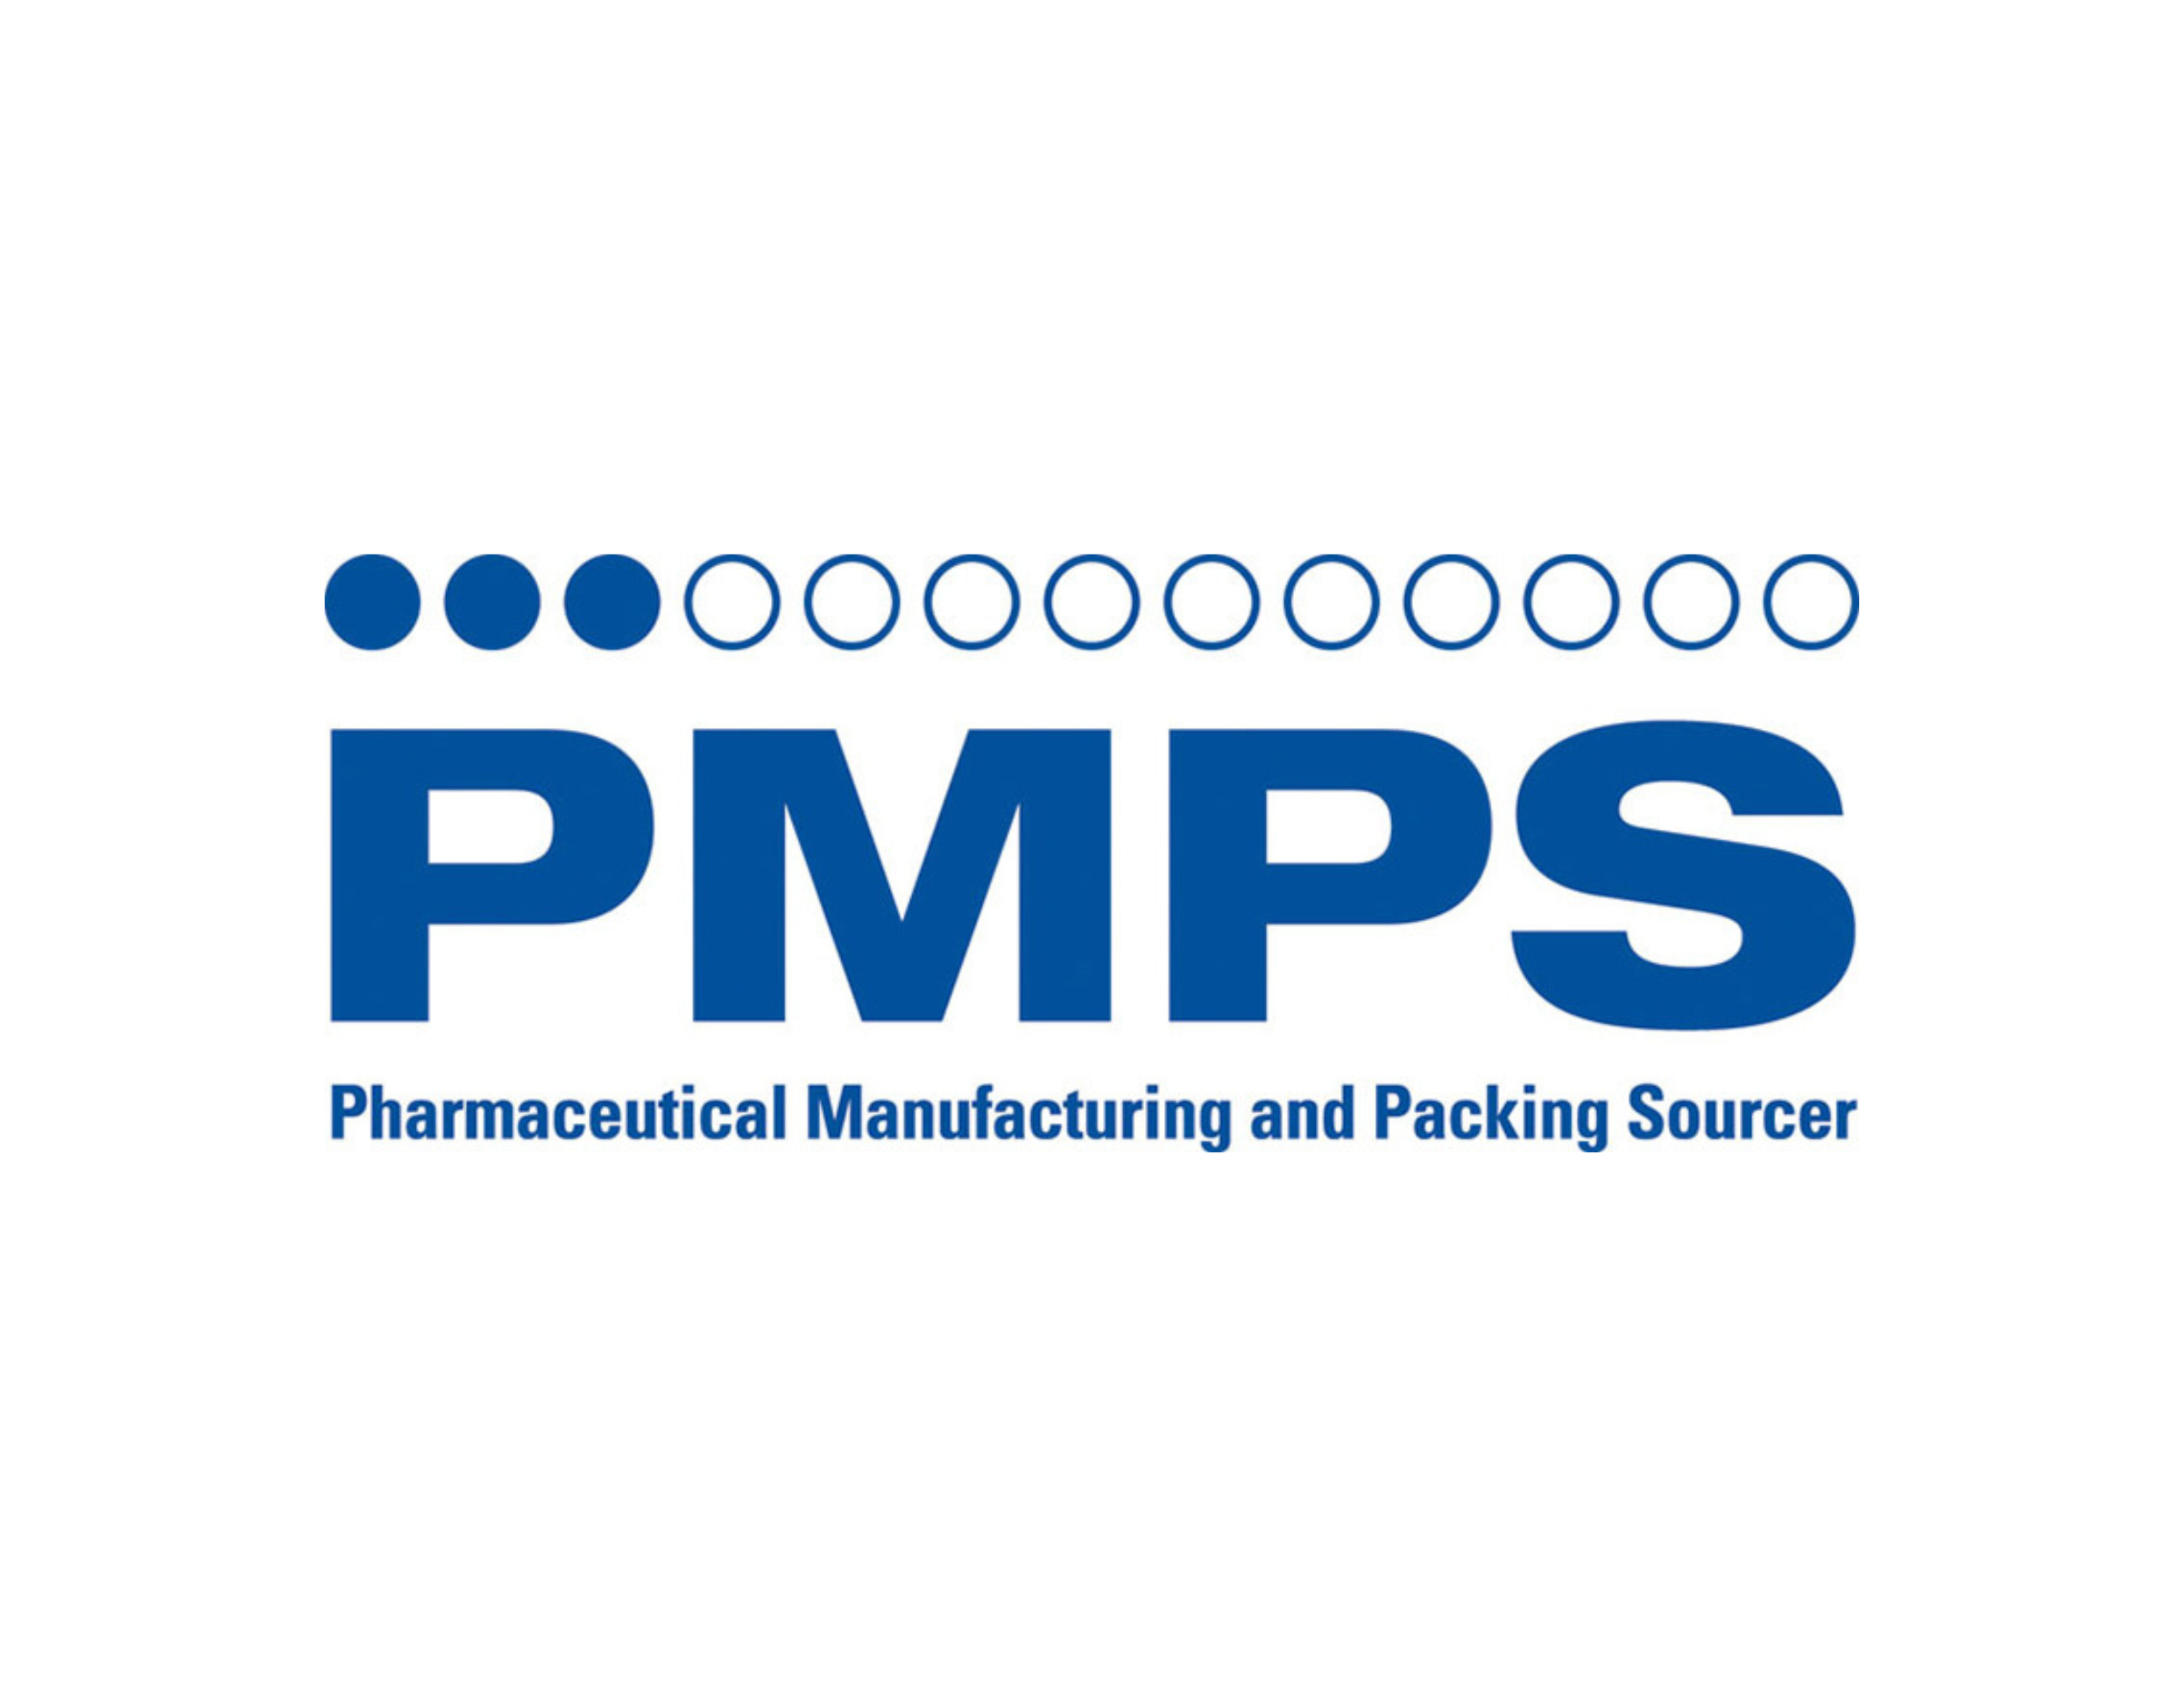 Pharmaceutical-Manufacturing-and-Packing-Sourcer